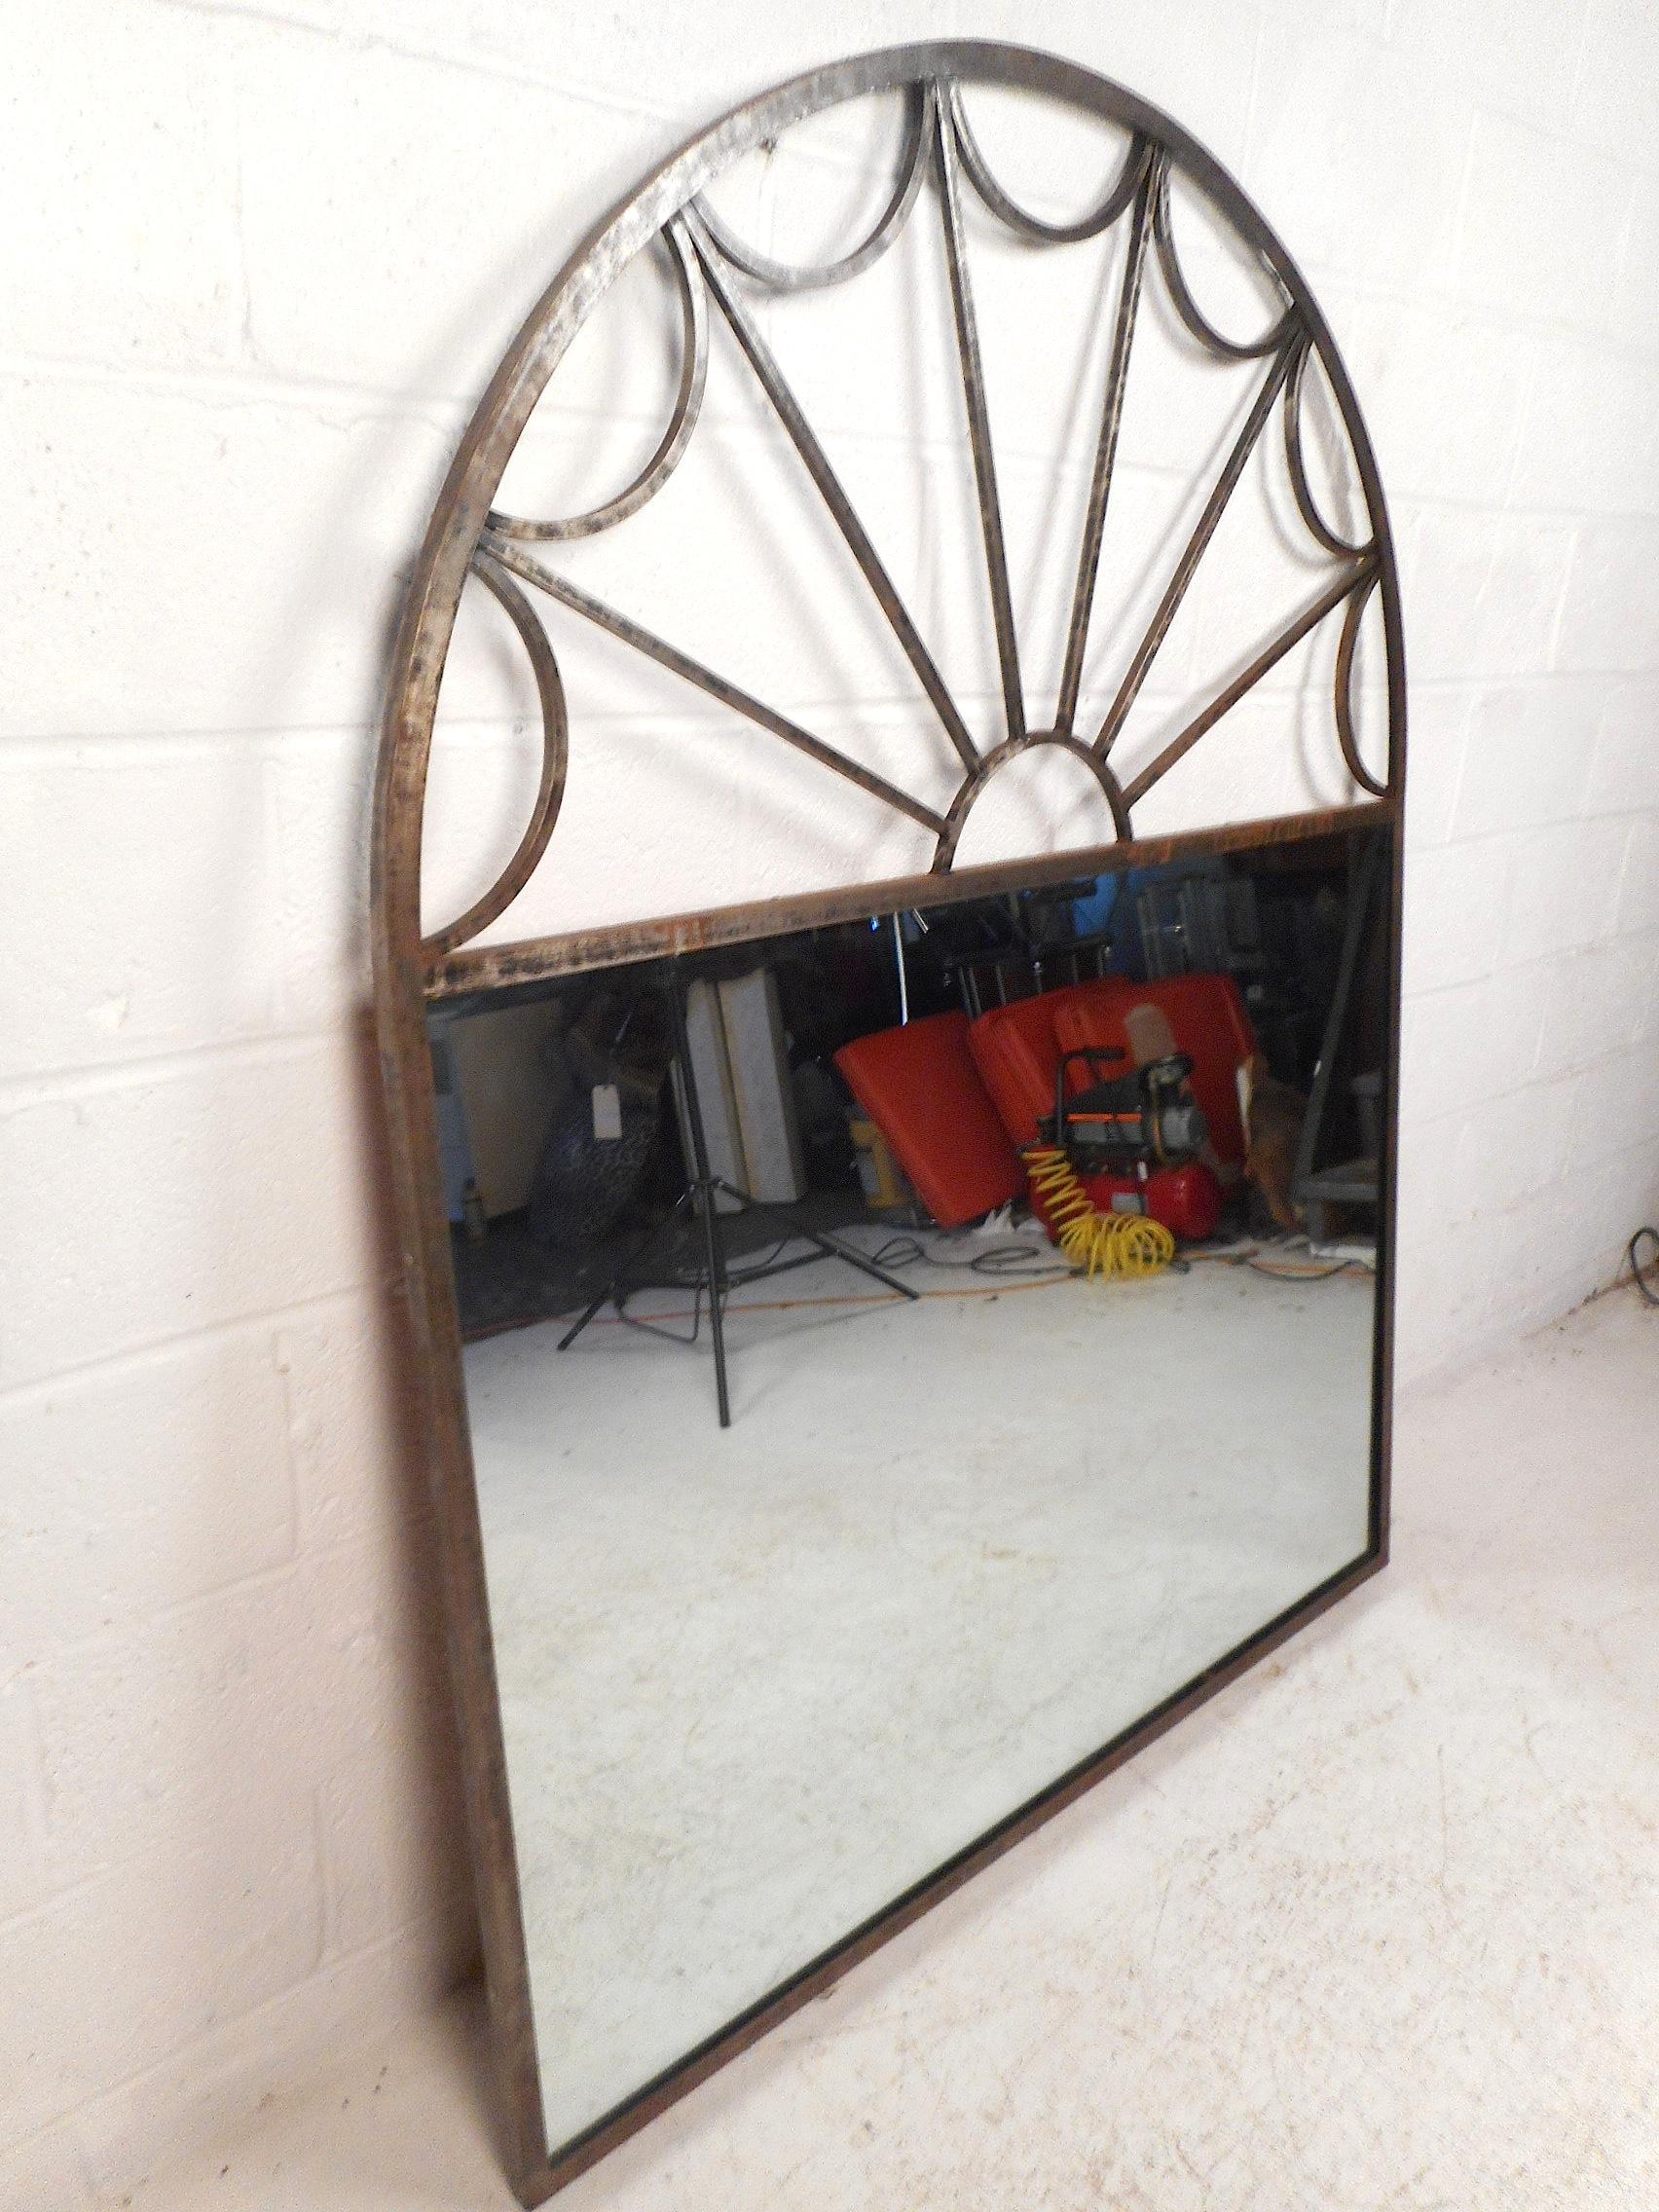 Large mirror encased in a decorative arched iron frame. Sturdy construction sure to add depth to any interior. Please confirm item location with dealer (NJ or NY).